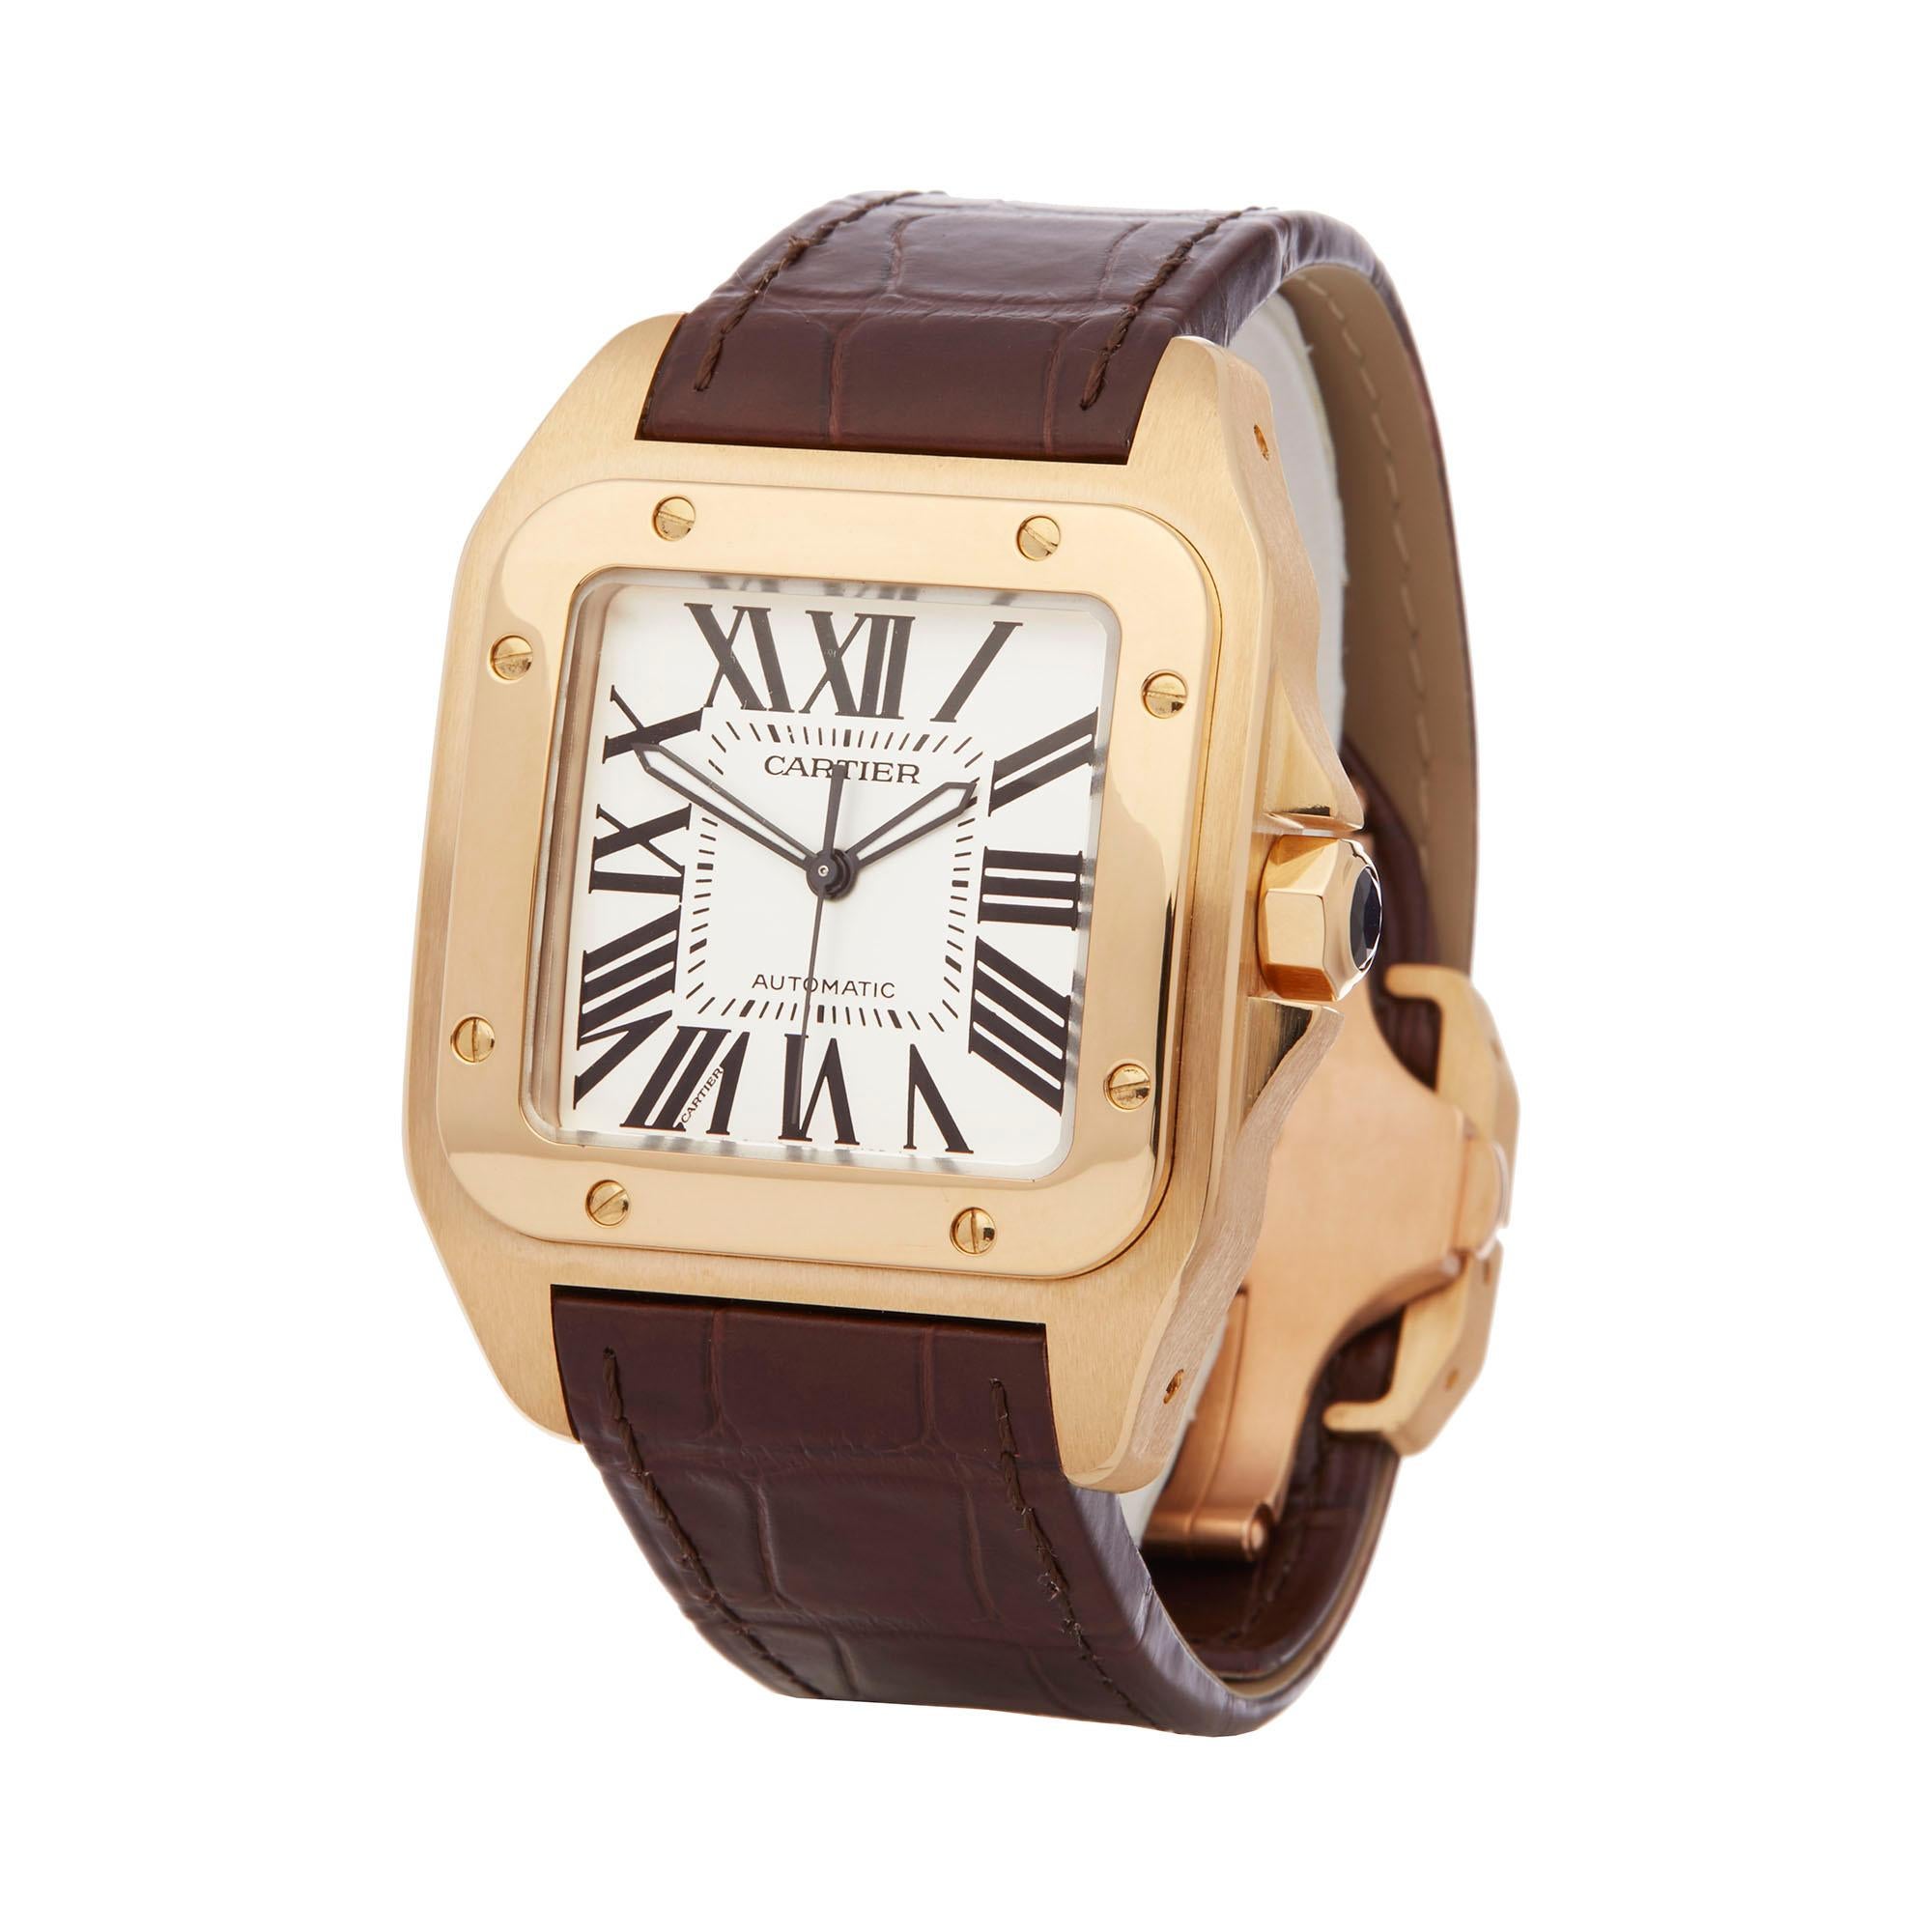 Ref: W6200
Manufacturer: Cartier
Model: Santos
Model Ref: 2657 or W20071Y1
Age: 27th July 2007
Gender: Mens
Complete With: Box, Manuals, Guarantee, Service Pouch and Service Papers dated 5th July 2019 
Dial: White Roman
Glass: Sapphire